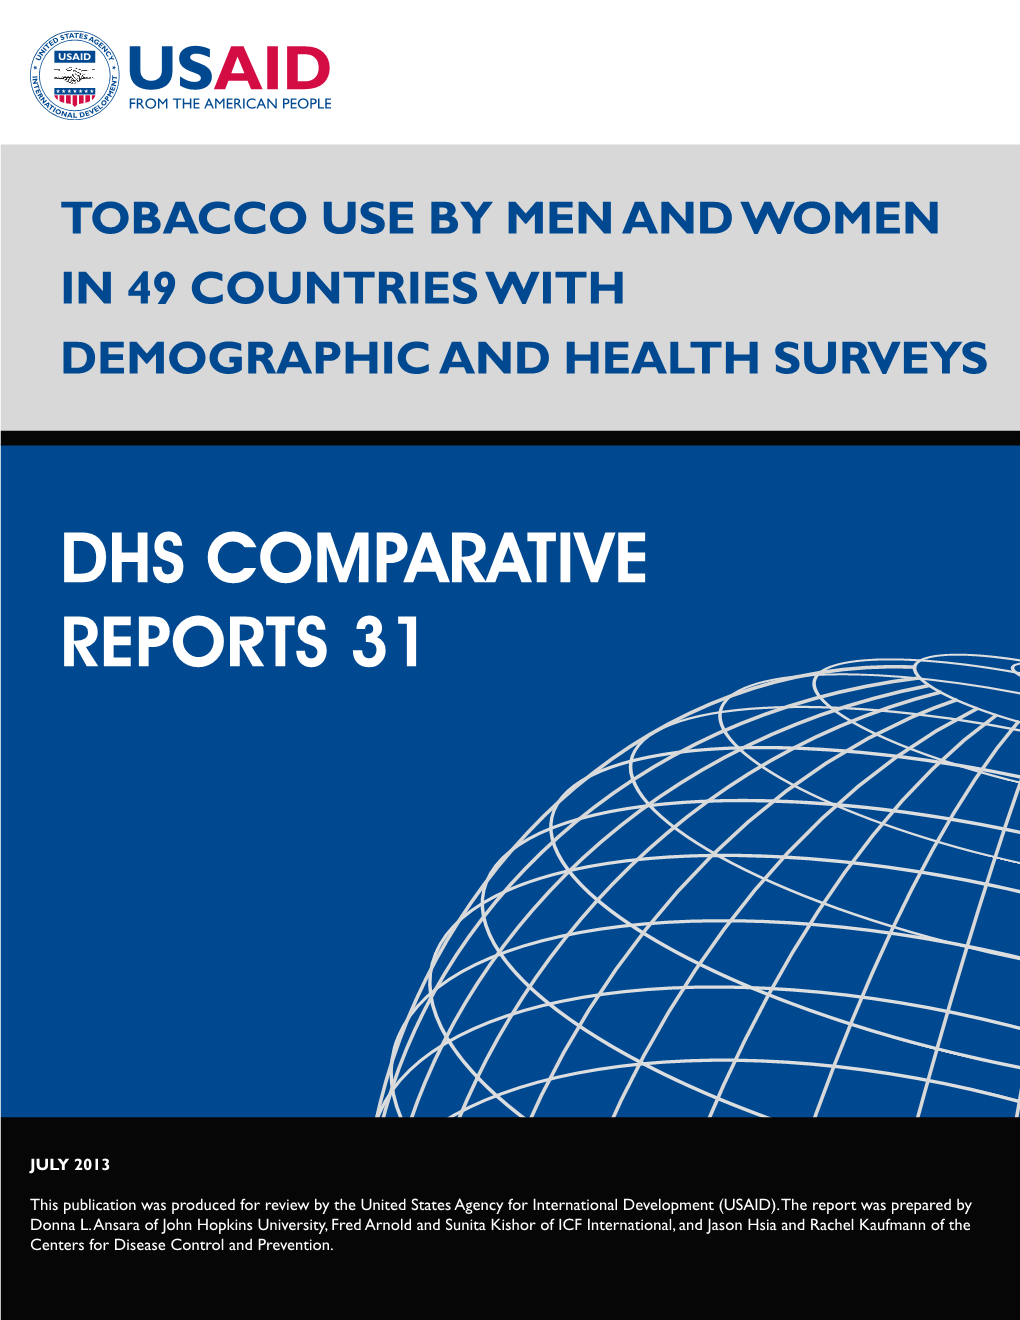 Tobacco Use by Men and Women in 49 Countries with Demographic and Health Surveys